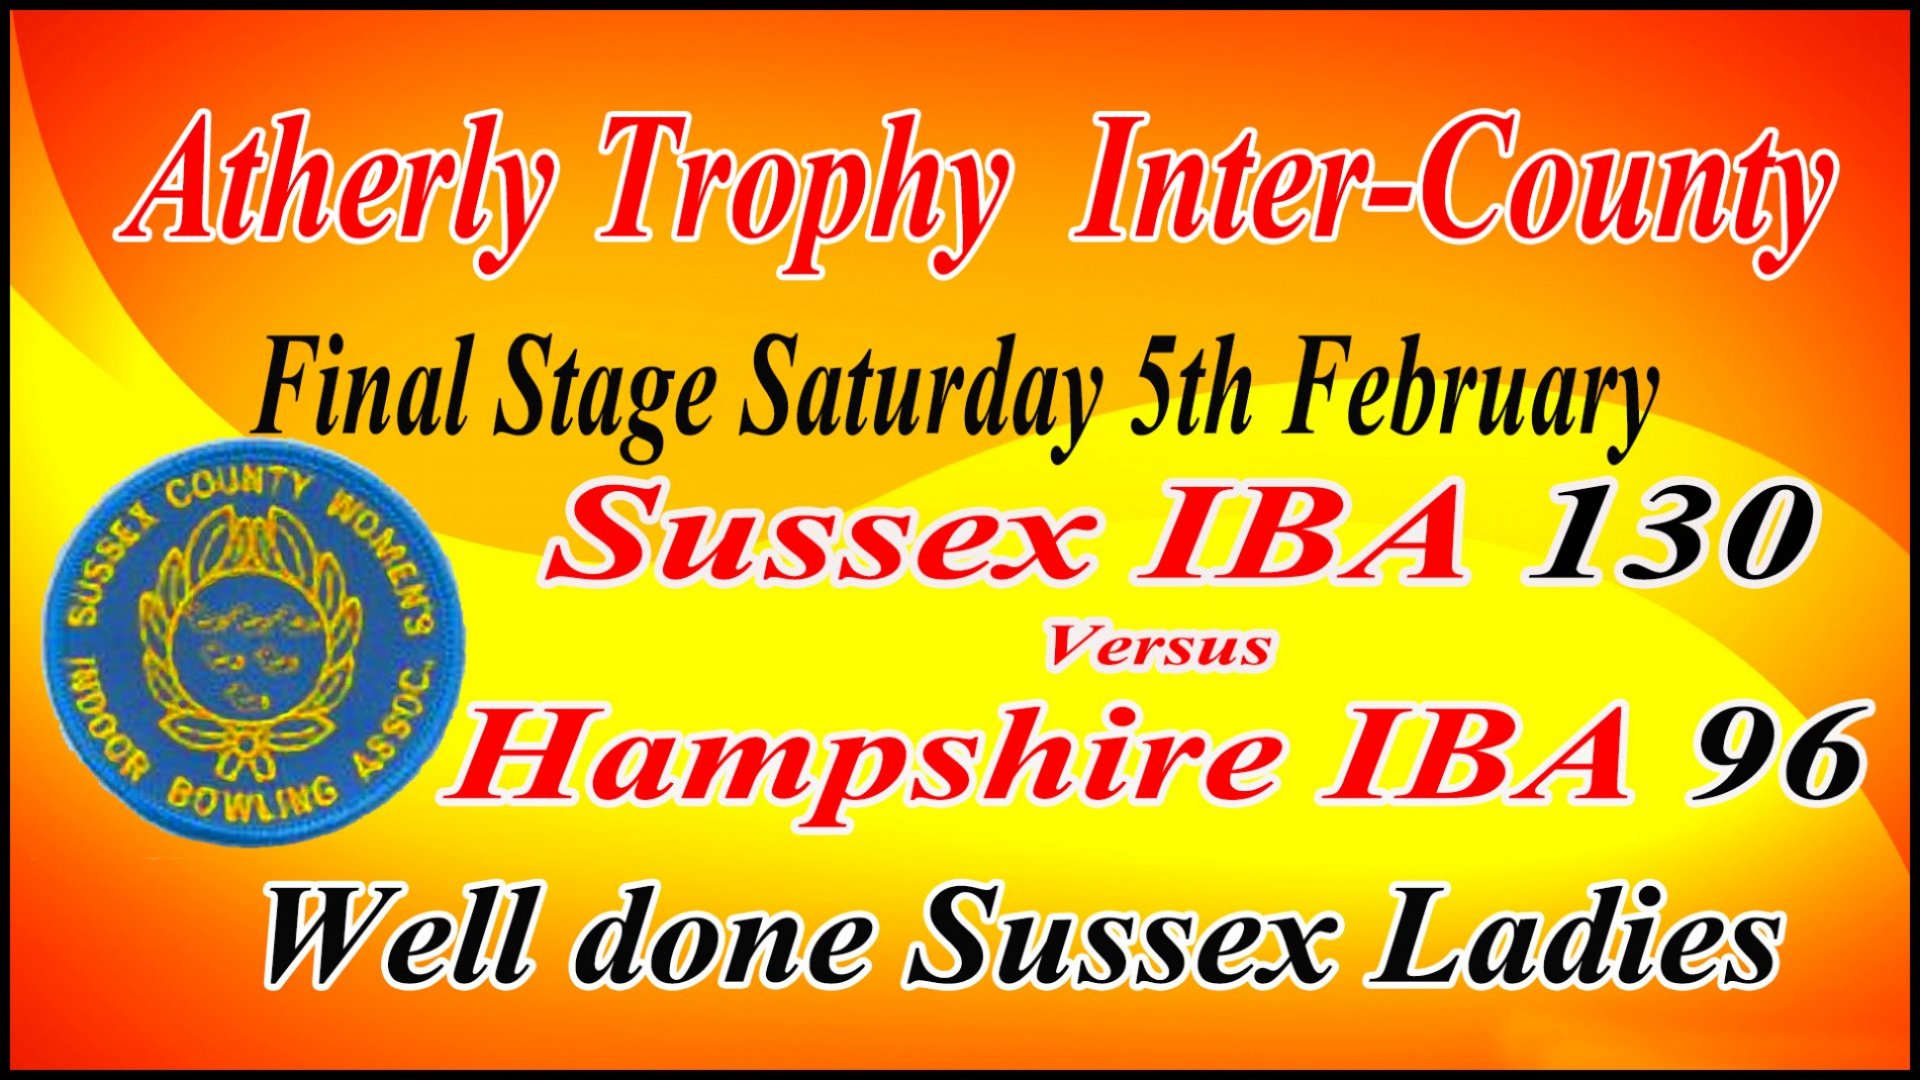 ATHERLY TROPHY INTER-COUNTY - FINAL STAGE RESULT - SUSSEX IBA v HAMPSHIRE IBA AT ADUR (5.2.22)